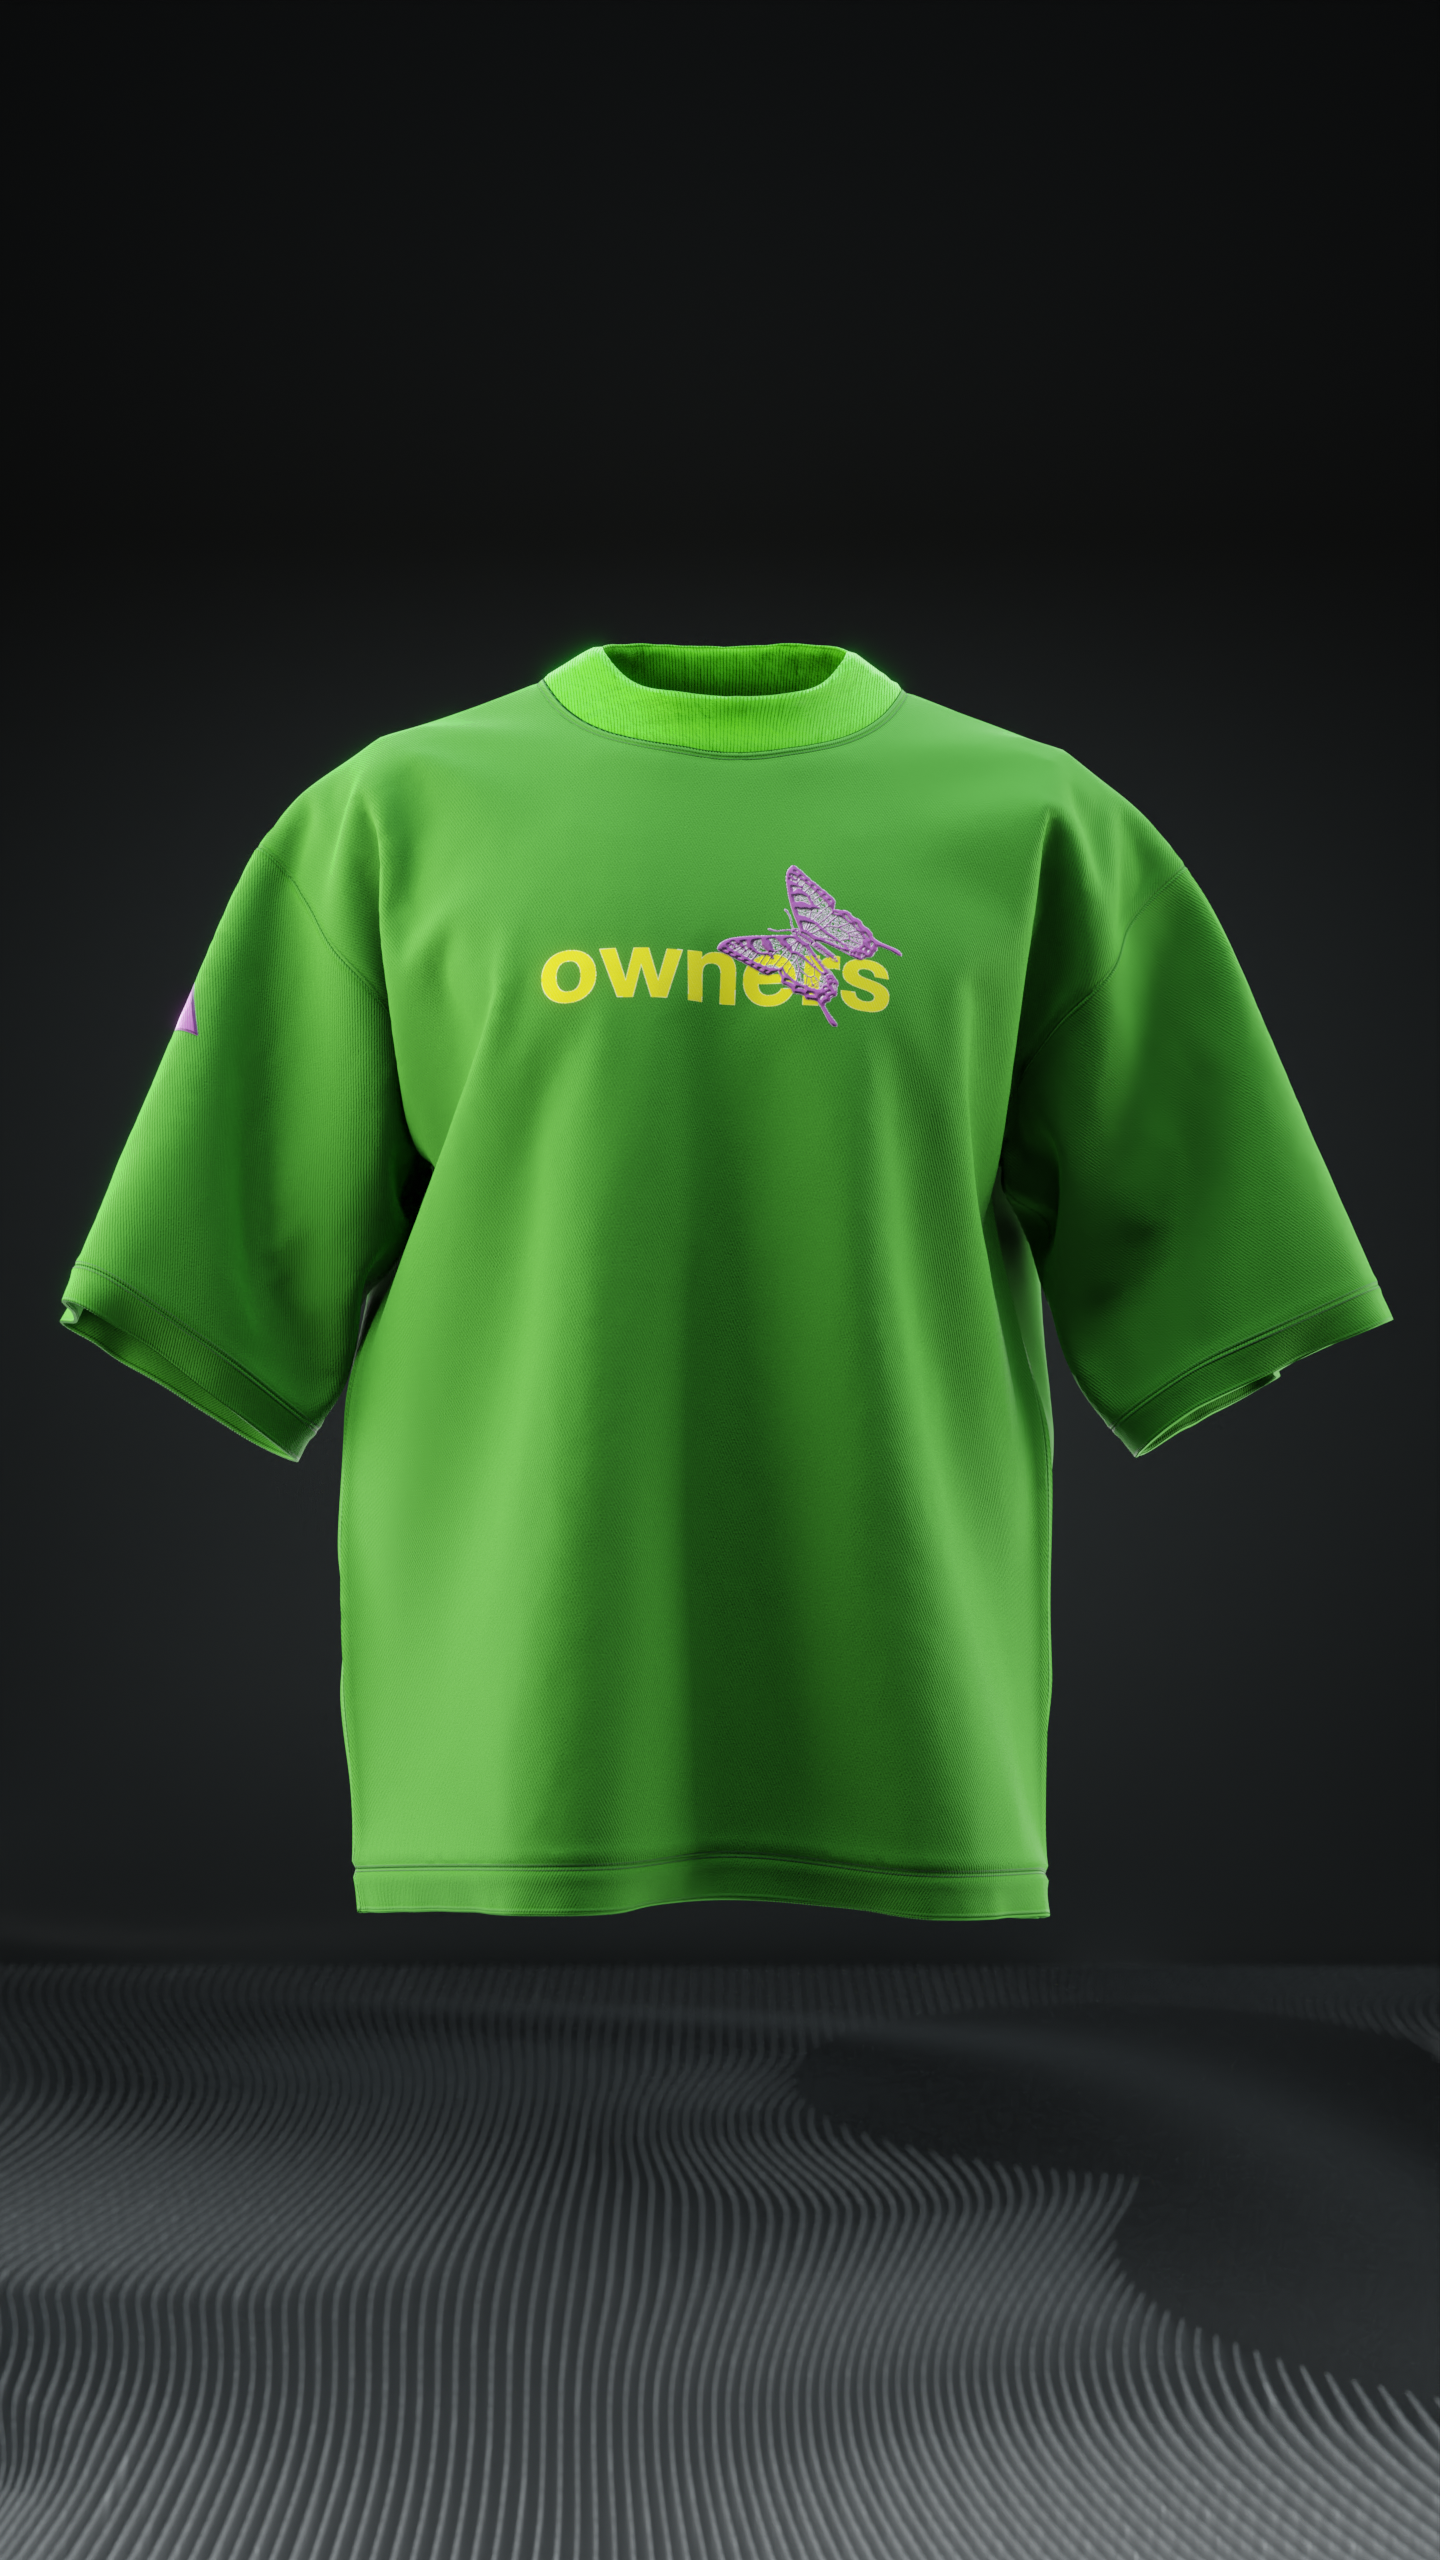 Owners Oversized T Shirt